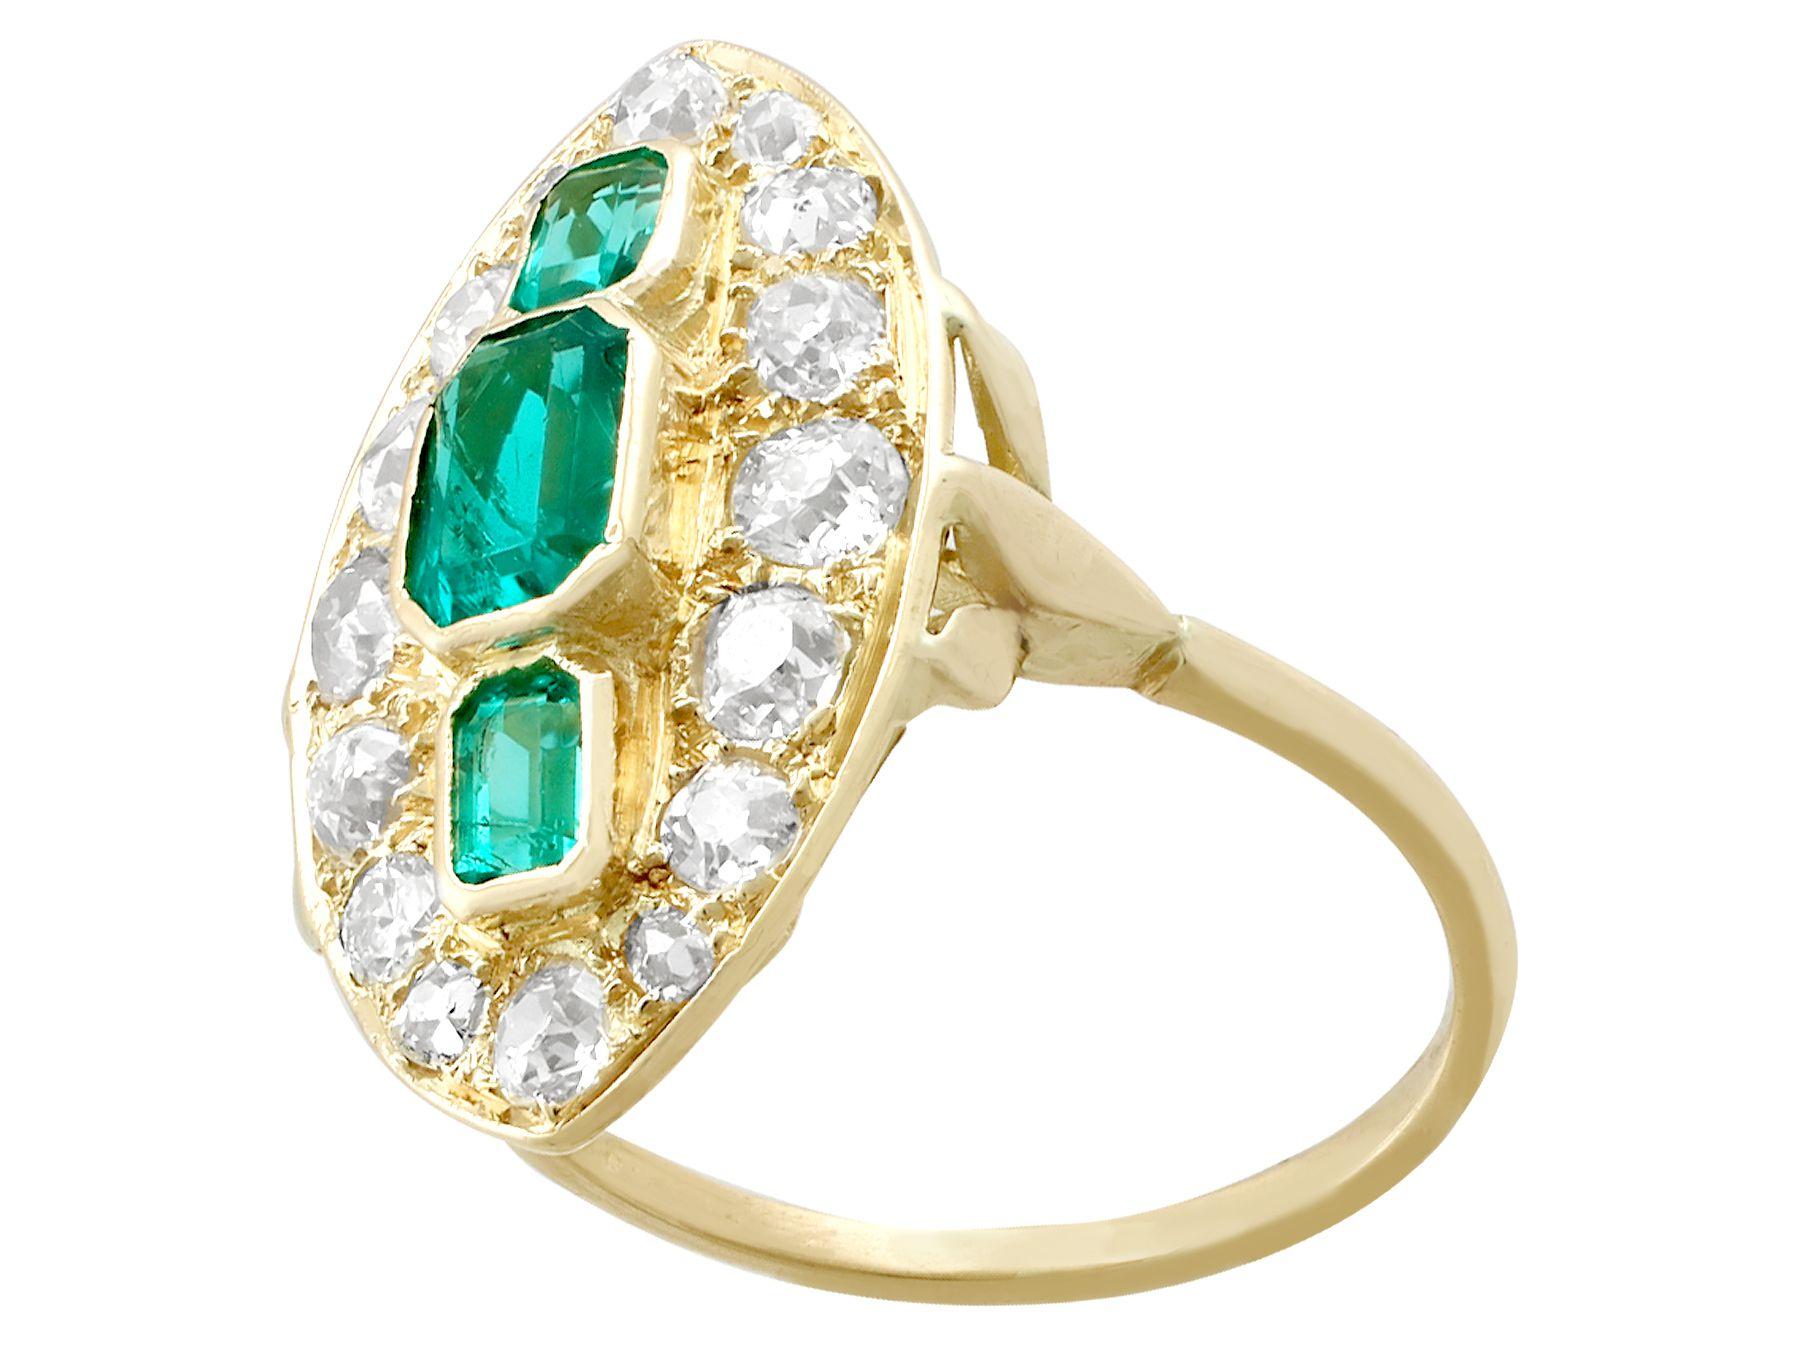 Antique Emerald 2.05 Carat Diamond Yellow Gold Marquise Ring In Excellent Condition For Sale In Jesmond, Newcastle Upon Tyne